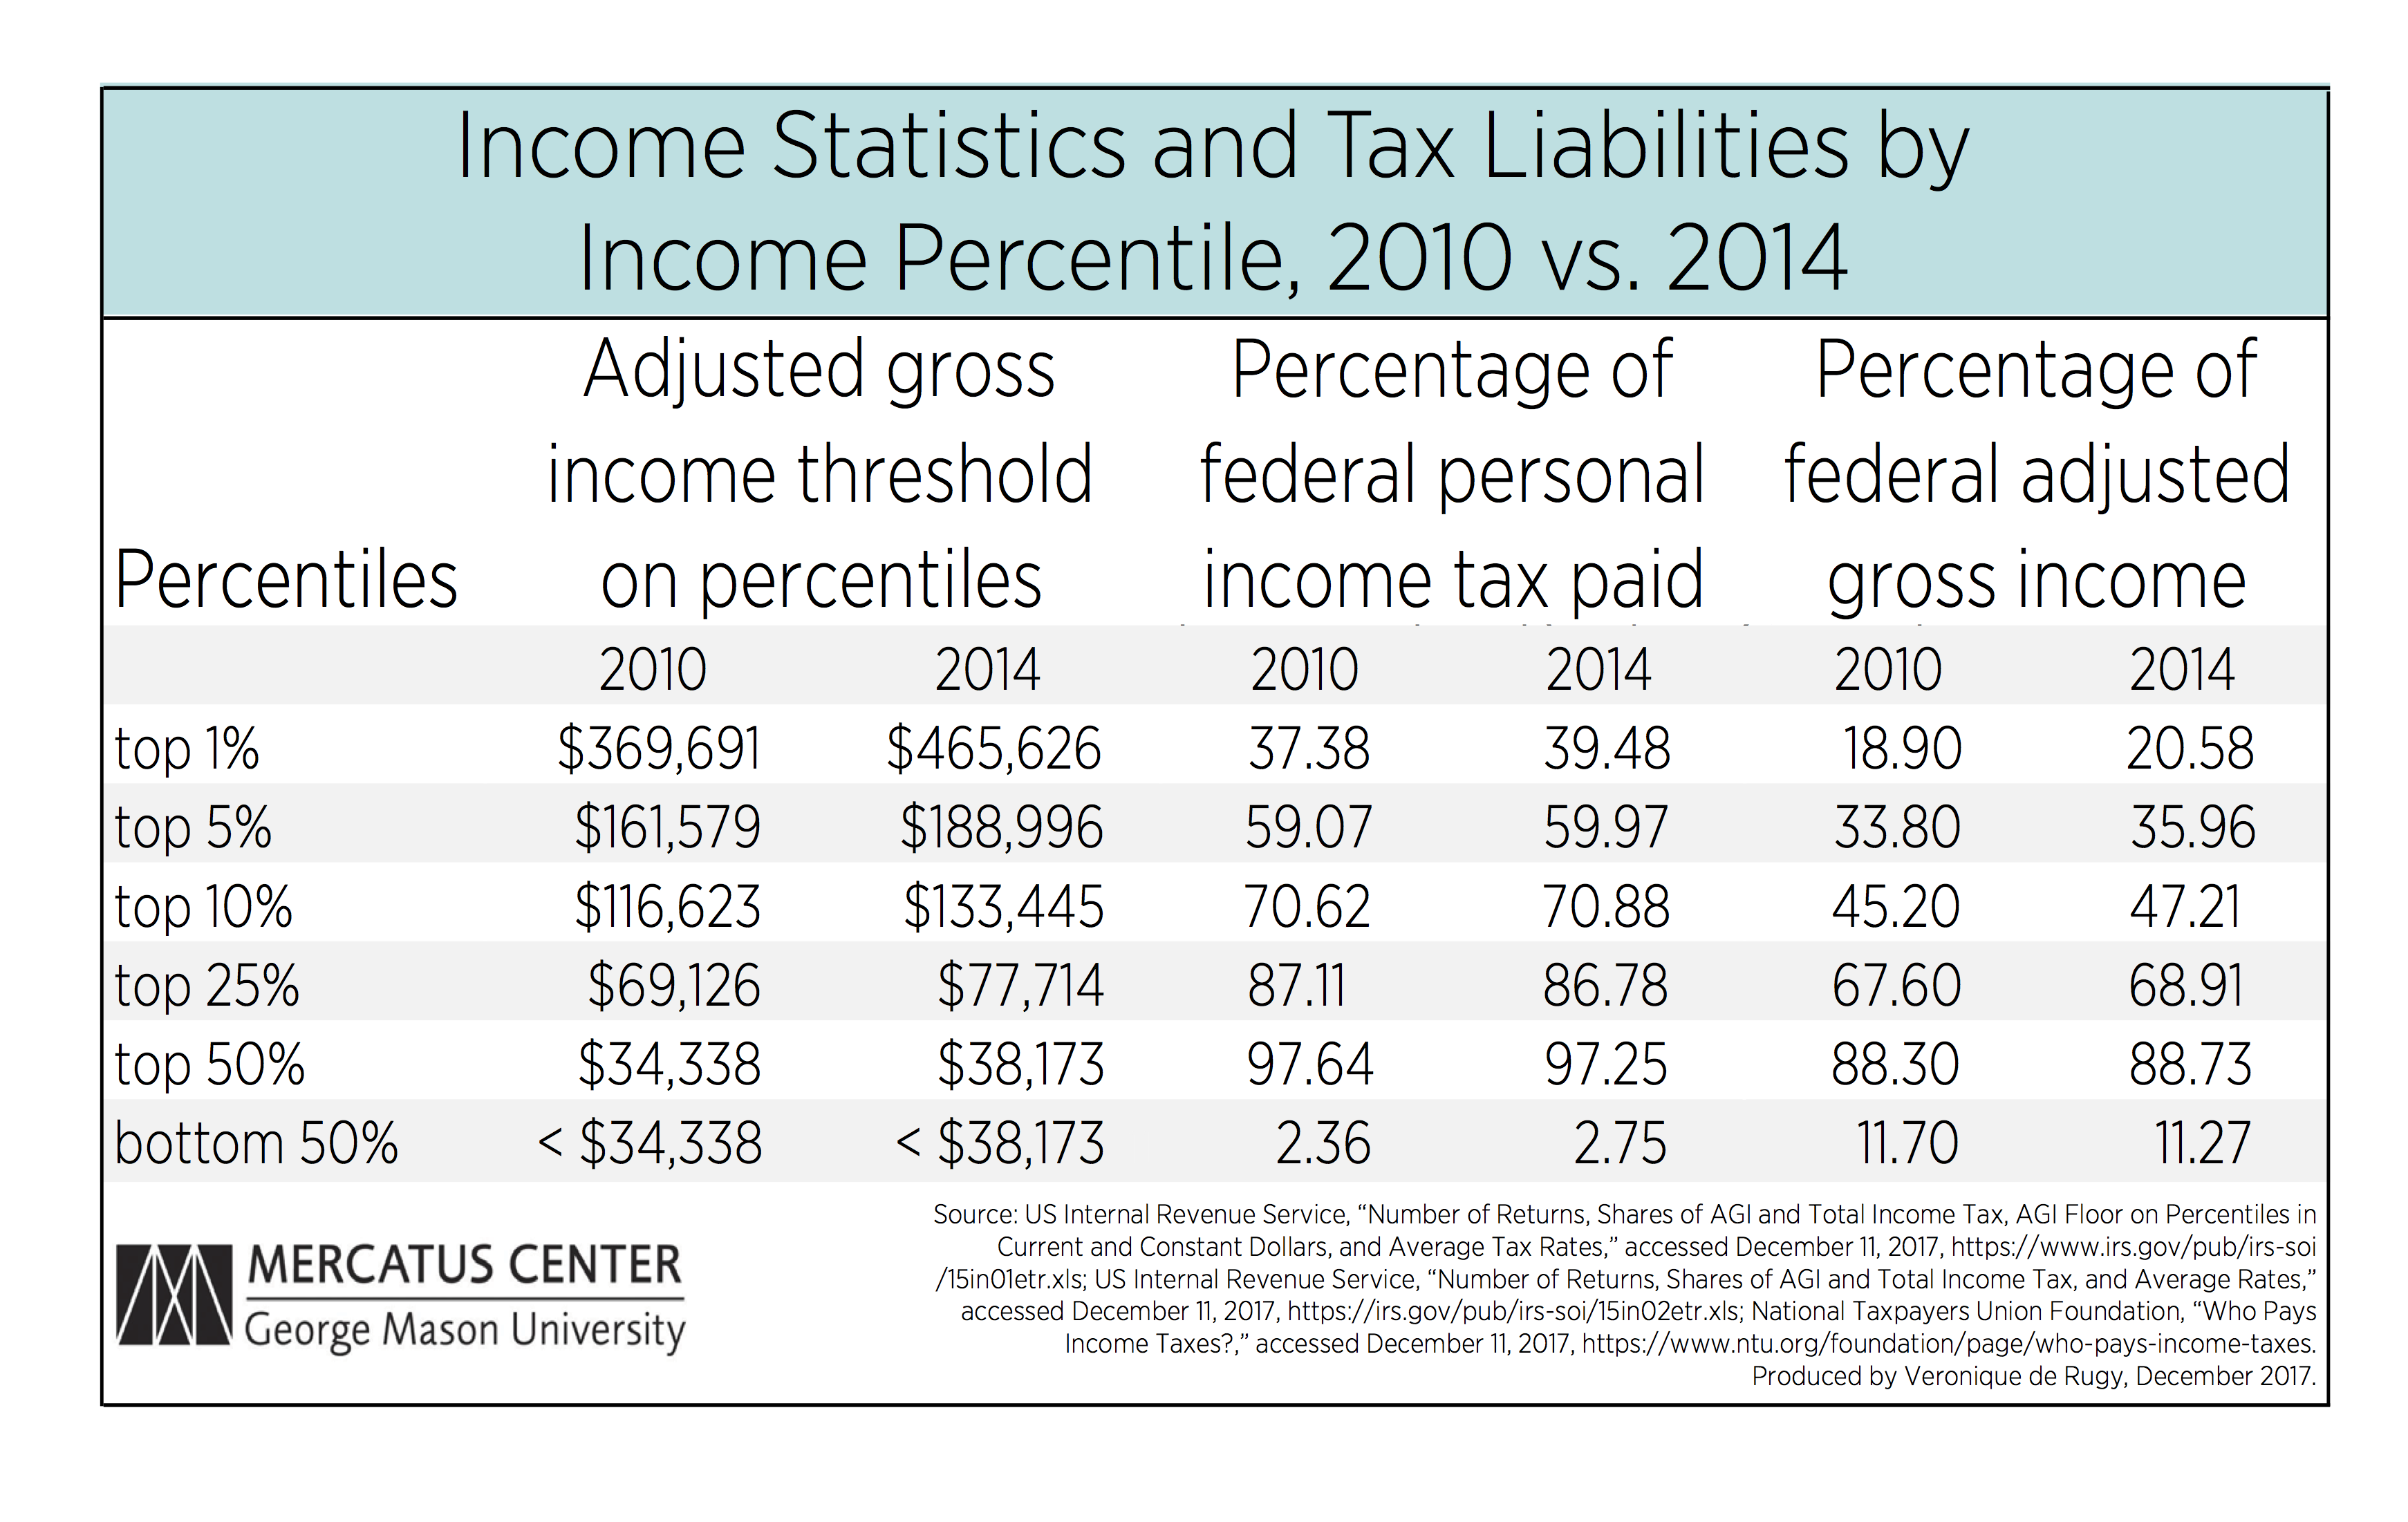 Who Pays the Income Tax? 